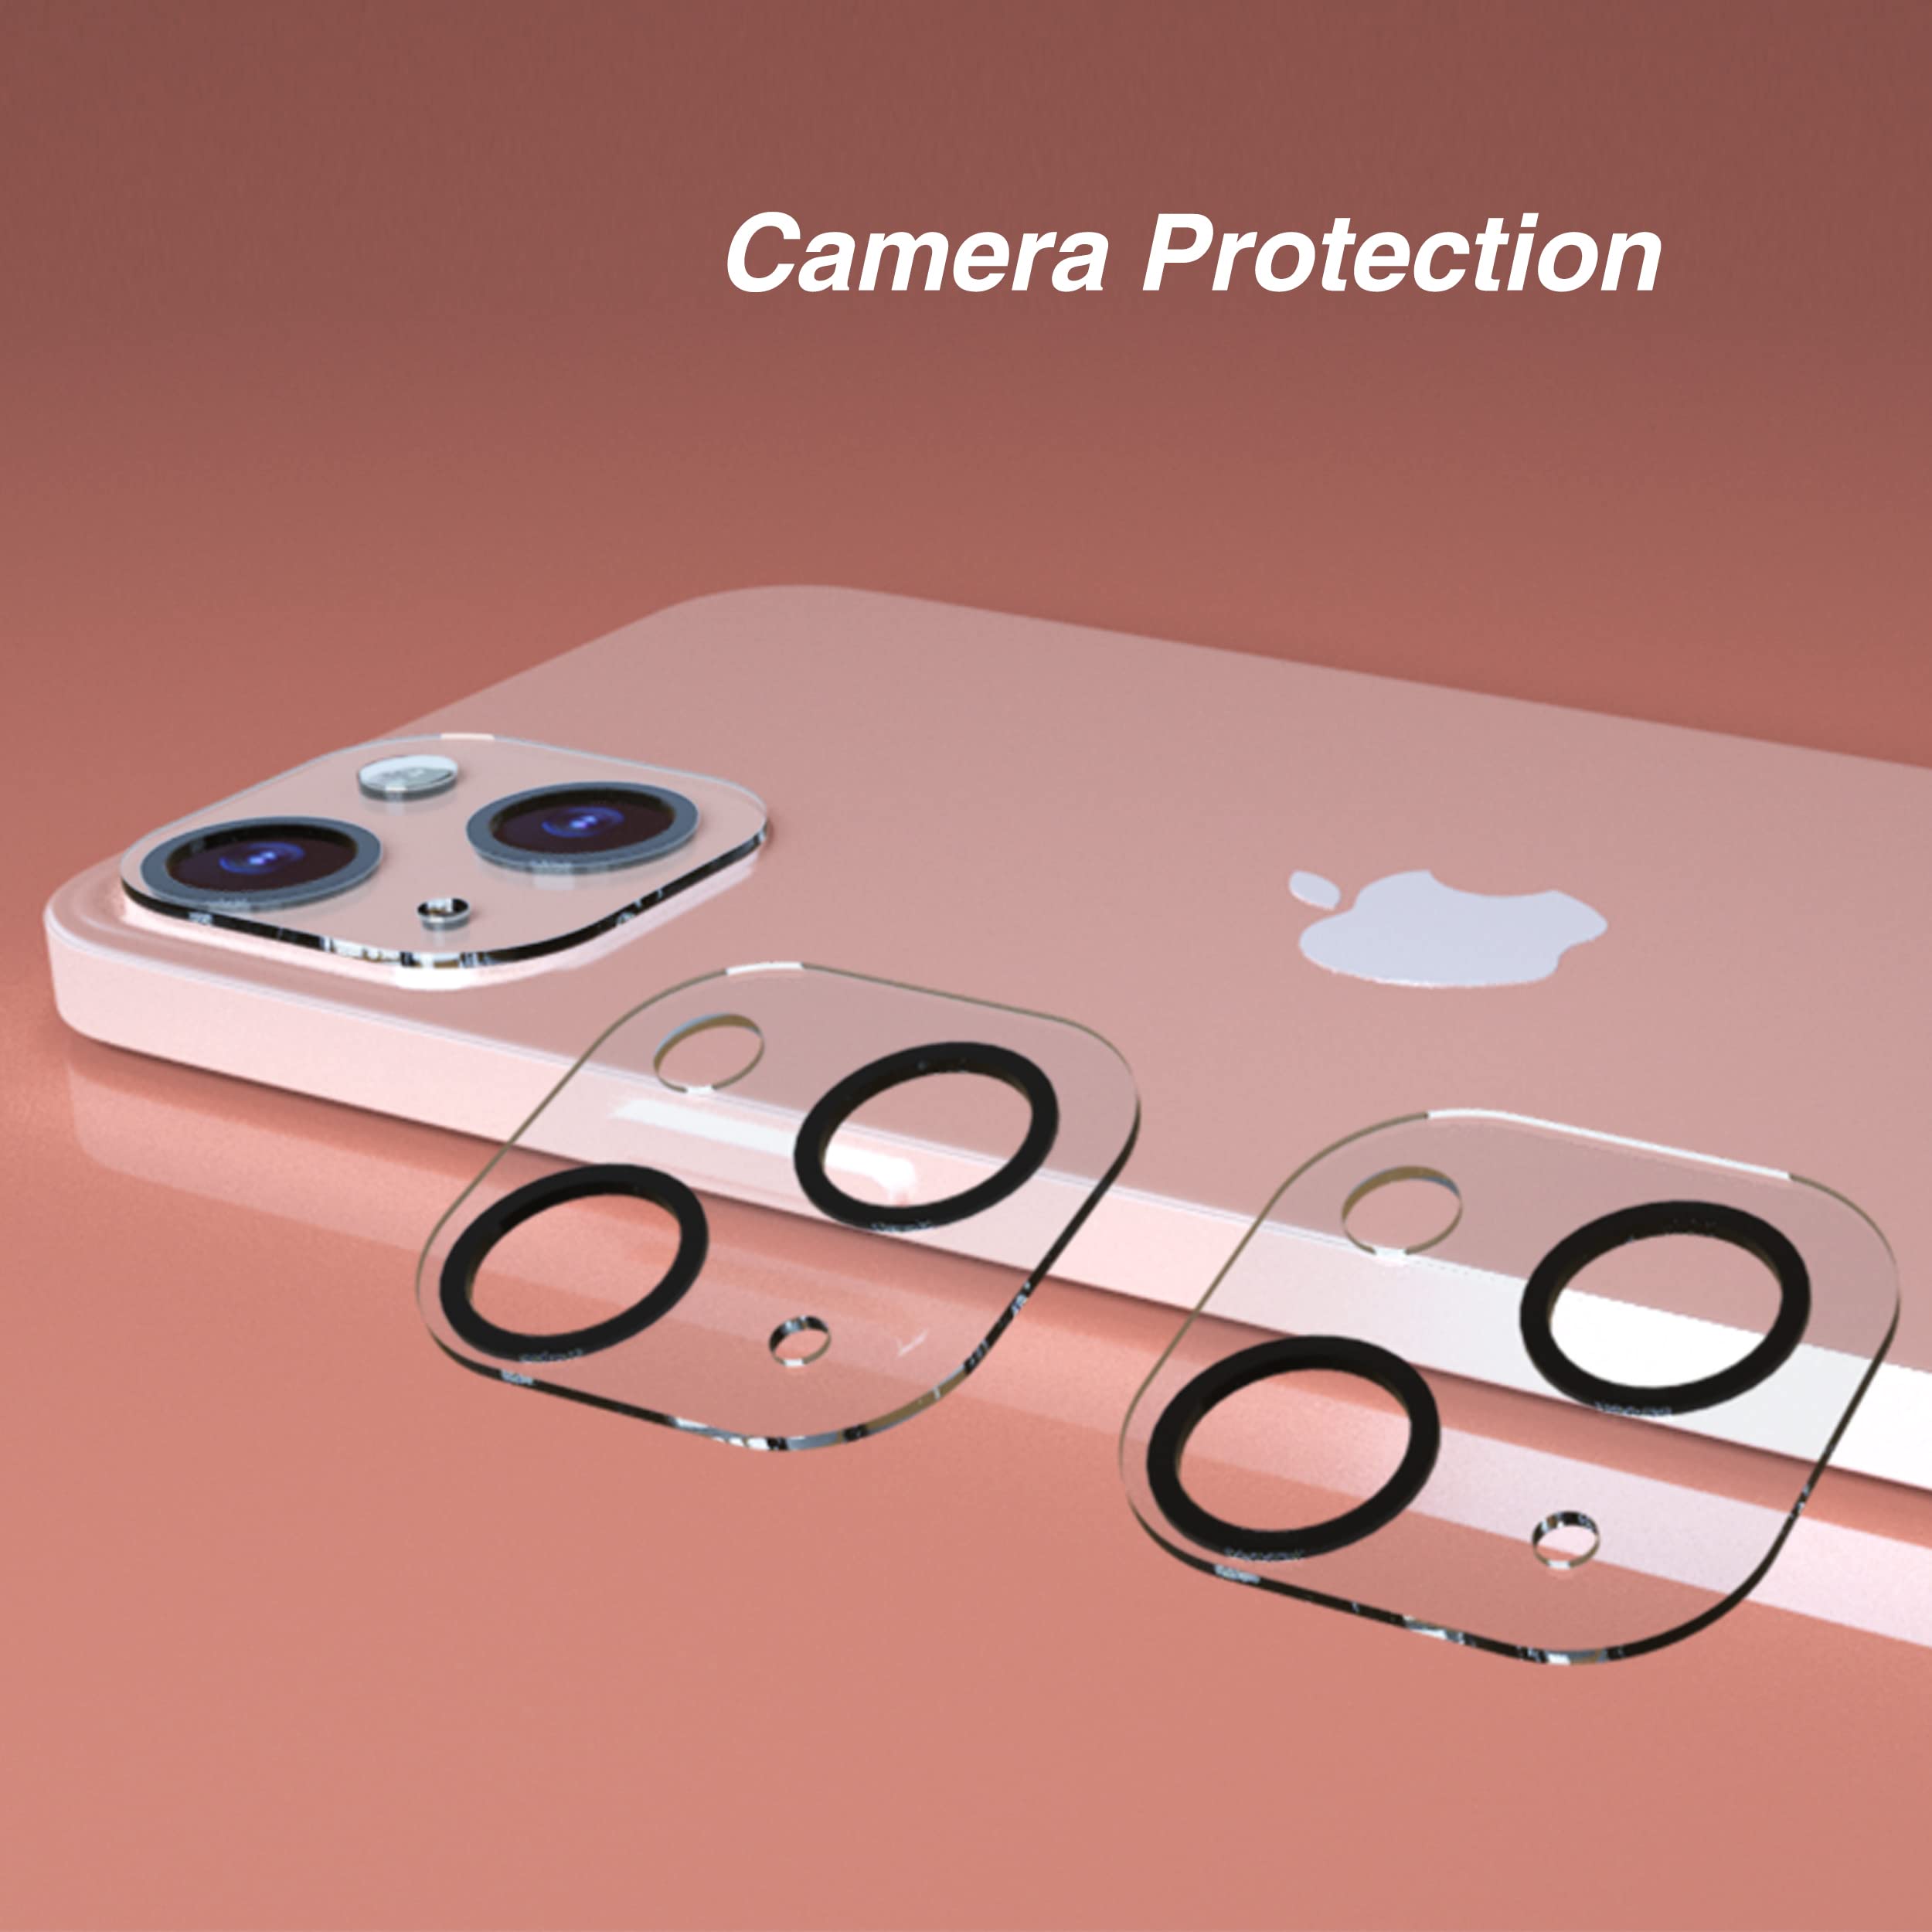 Ailun 3 Pack Camera Lens Protector for iPhone 14 6.1